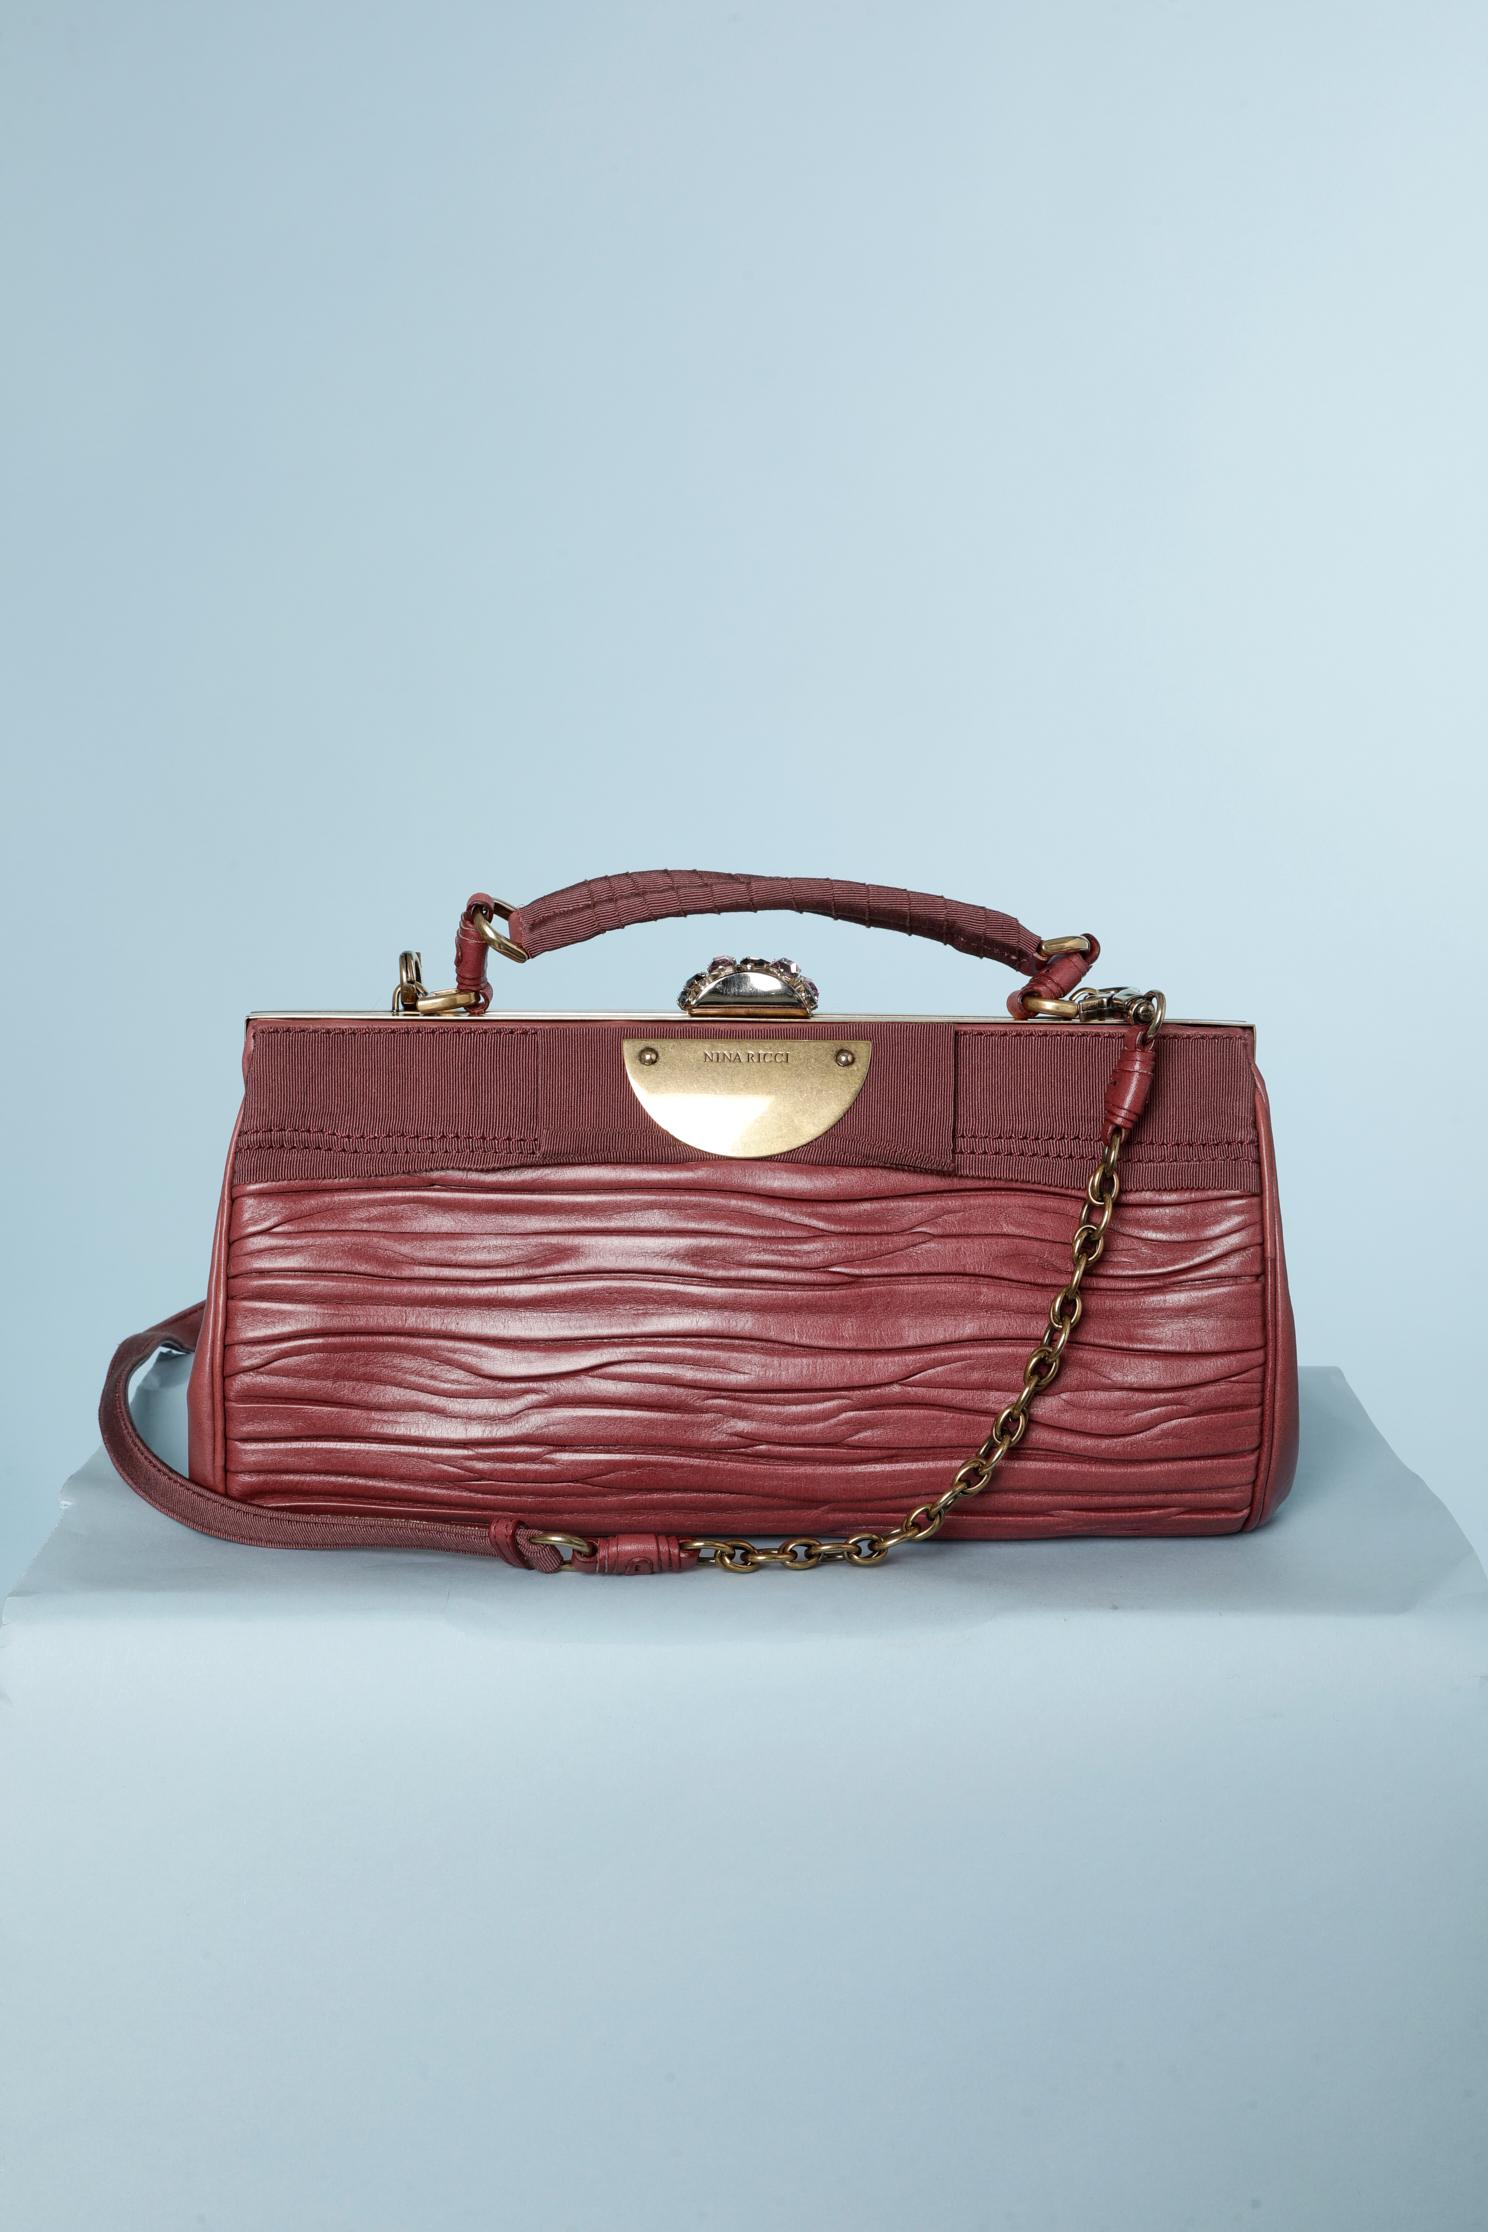 Rose wood color pleated leather and gros-grain shoulder  bag.
Short bag handle: 30 cm
Long bag handle ( detachable) : 120 cm 
Jewelry rhinestone bag clasp.
Pale pink cotton lining and 2 flats pockets inside.
One zipped pocket on the back of the bag.